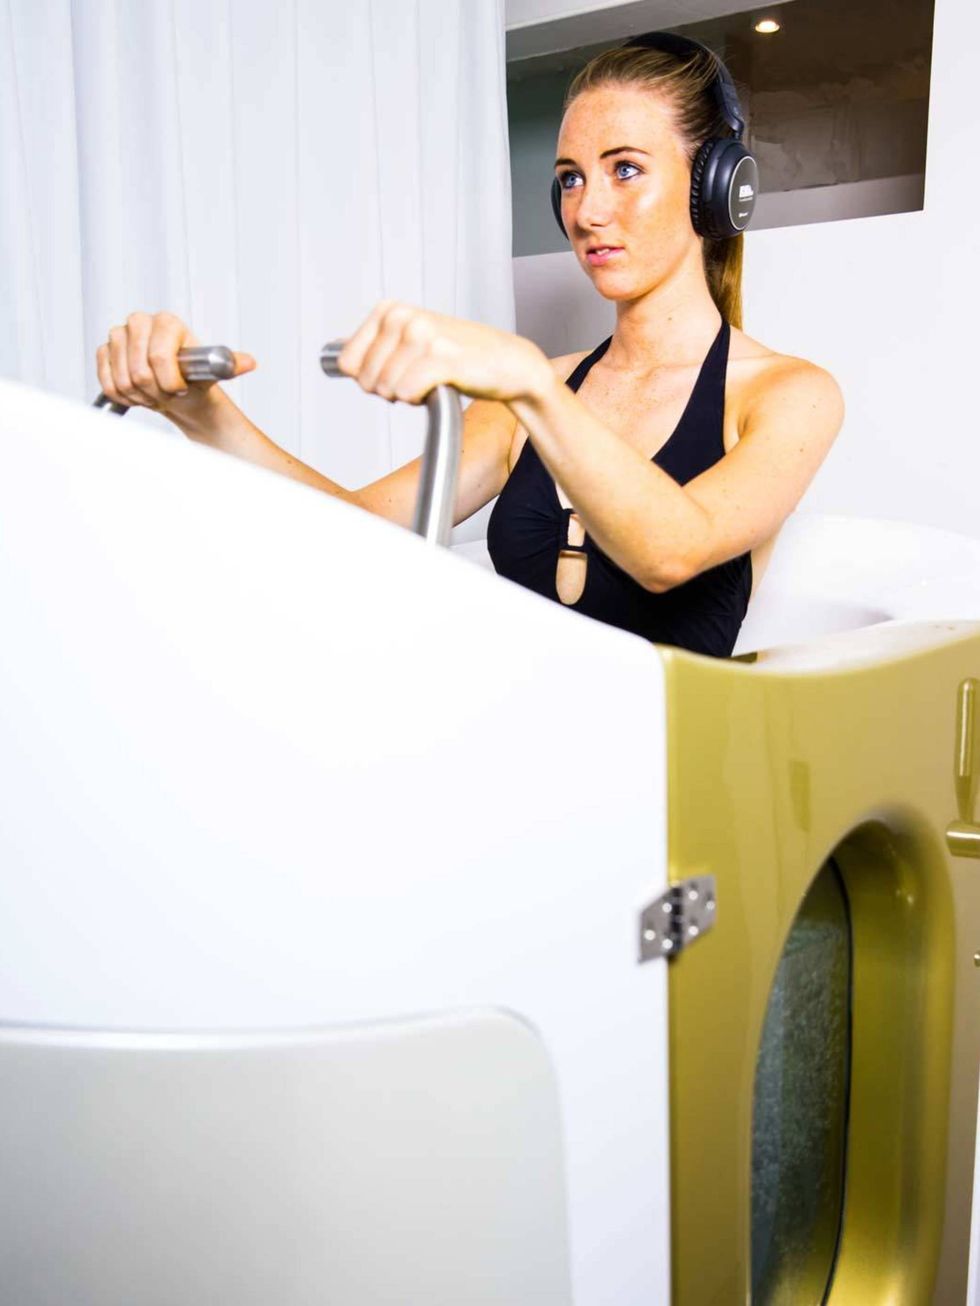 <p>At HydroFit you get your own water cabin complete with underwater bike, hydro jets, the choice of music or video, as well as Bluetooth headsets so you can make private phone calls (very multi-tasking). The idea is you can walk, jog or cycle in the wate